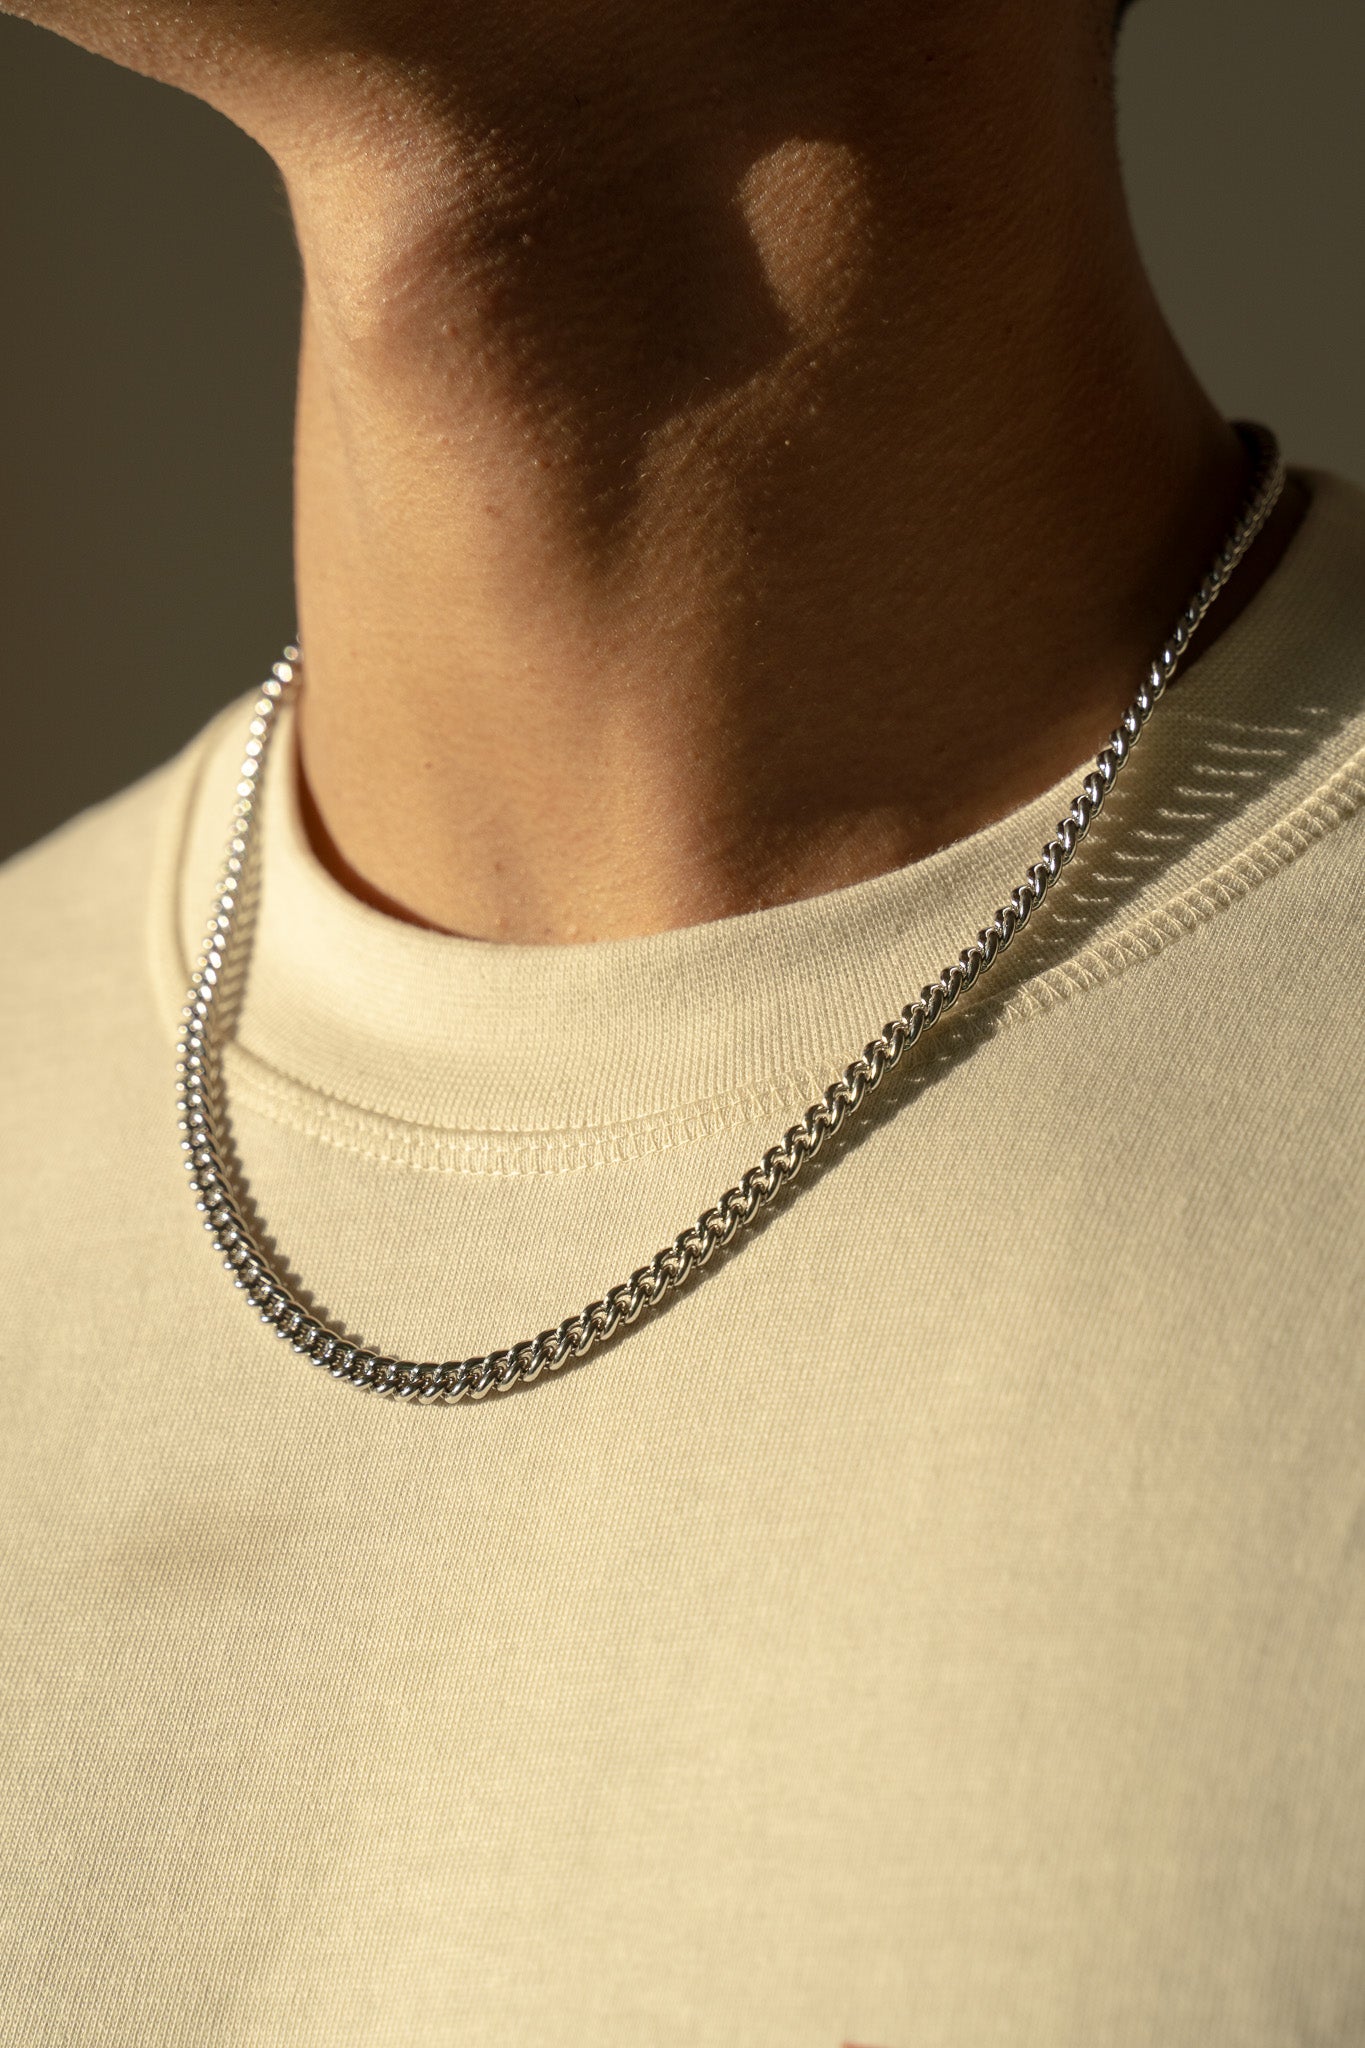 Victoria Necklace in White Gold - 5mm